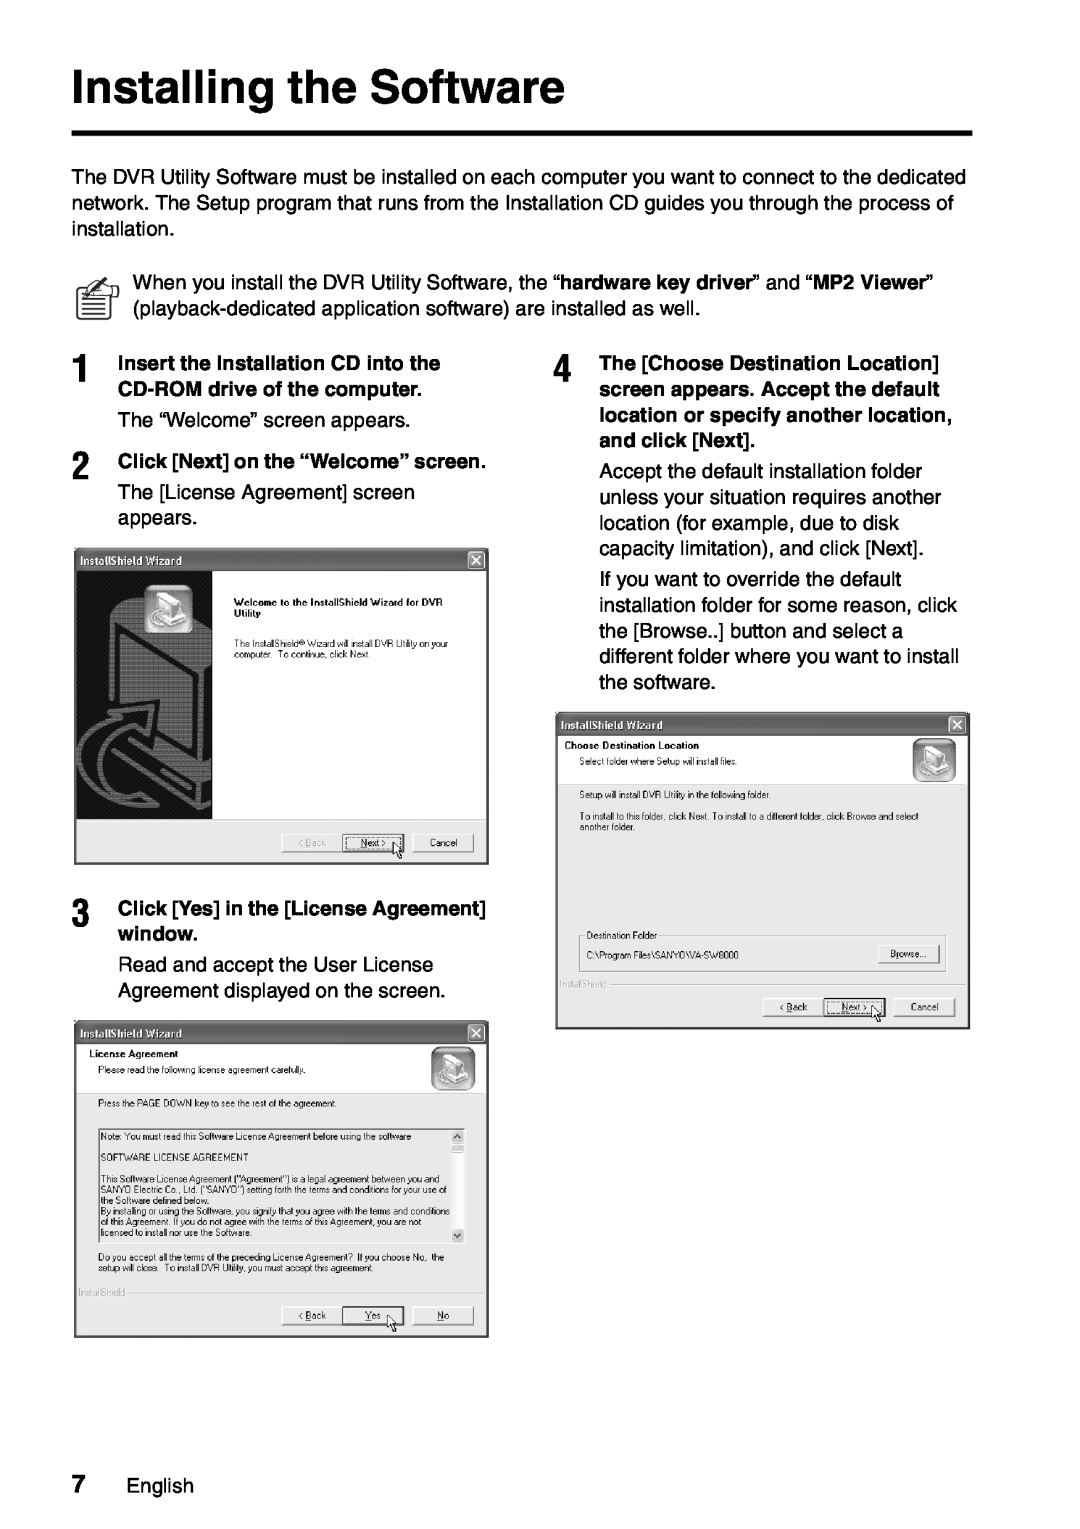 Sanyo VA-SW8000LITE instruction manual Installing the Software, Click Next on the “Welcome” screen, window 